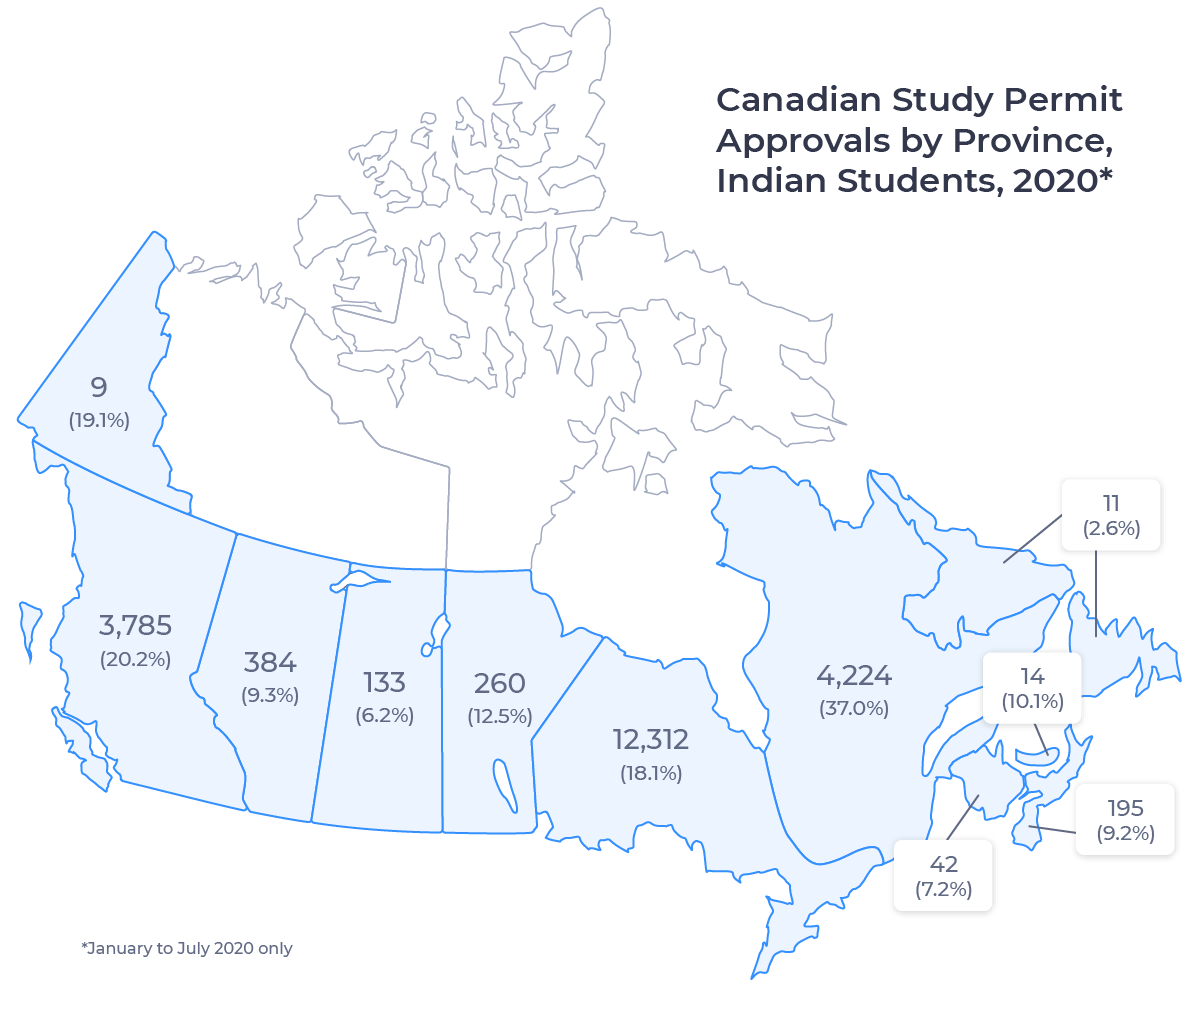 Map of Canada showing the number of study approvals for Indian students in each province between January and July 2020. Described in detail below.